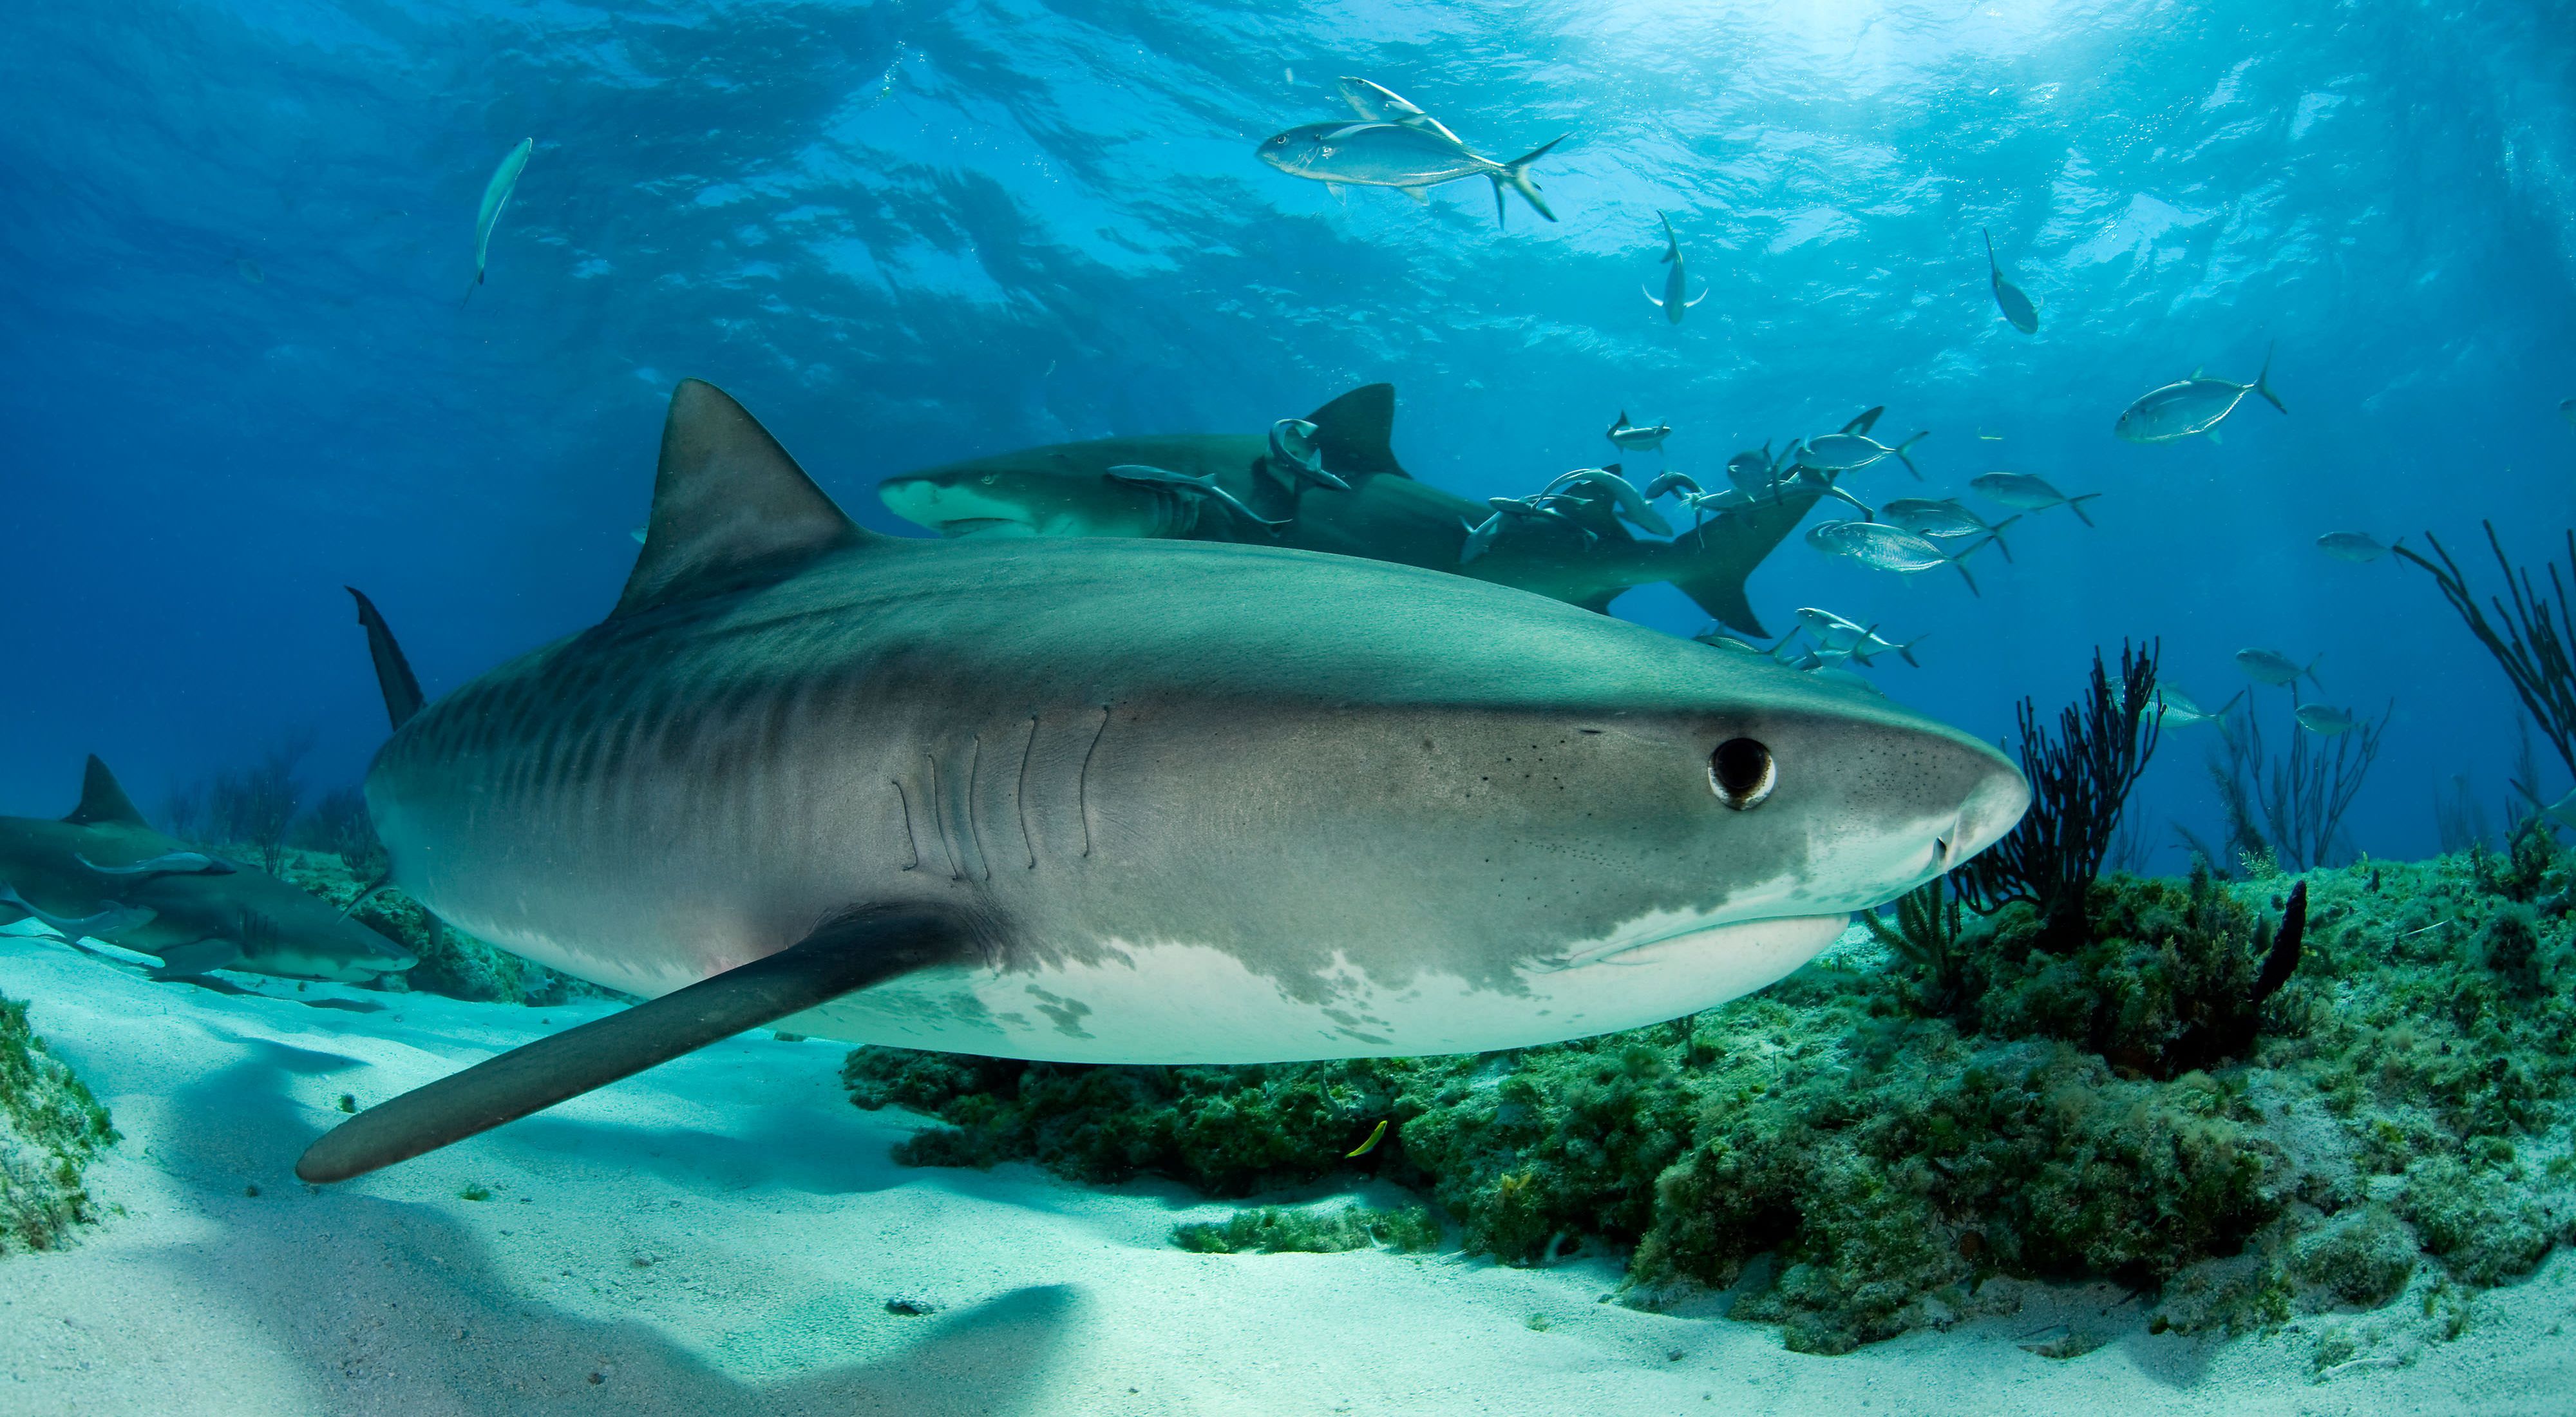 underwater side view of a shark near the bottom sand